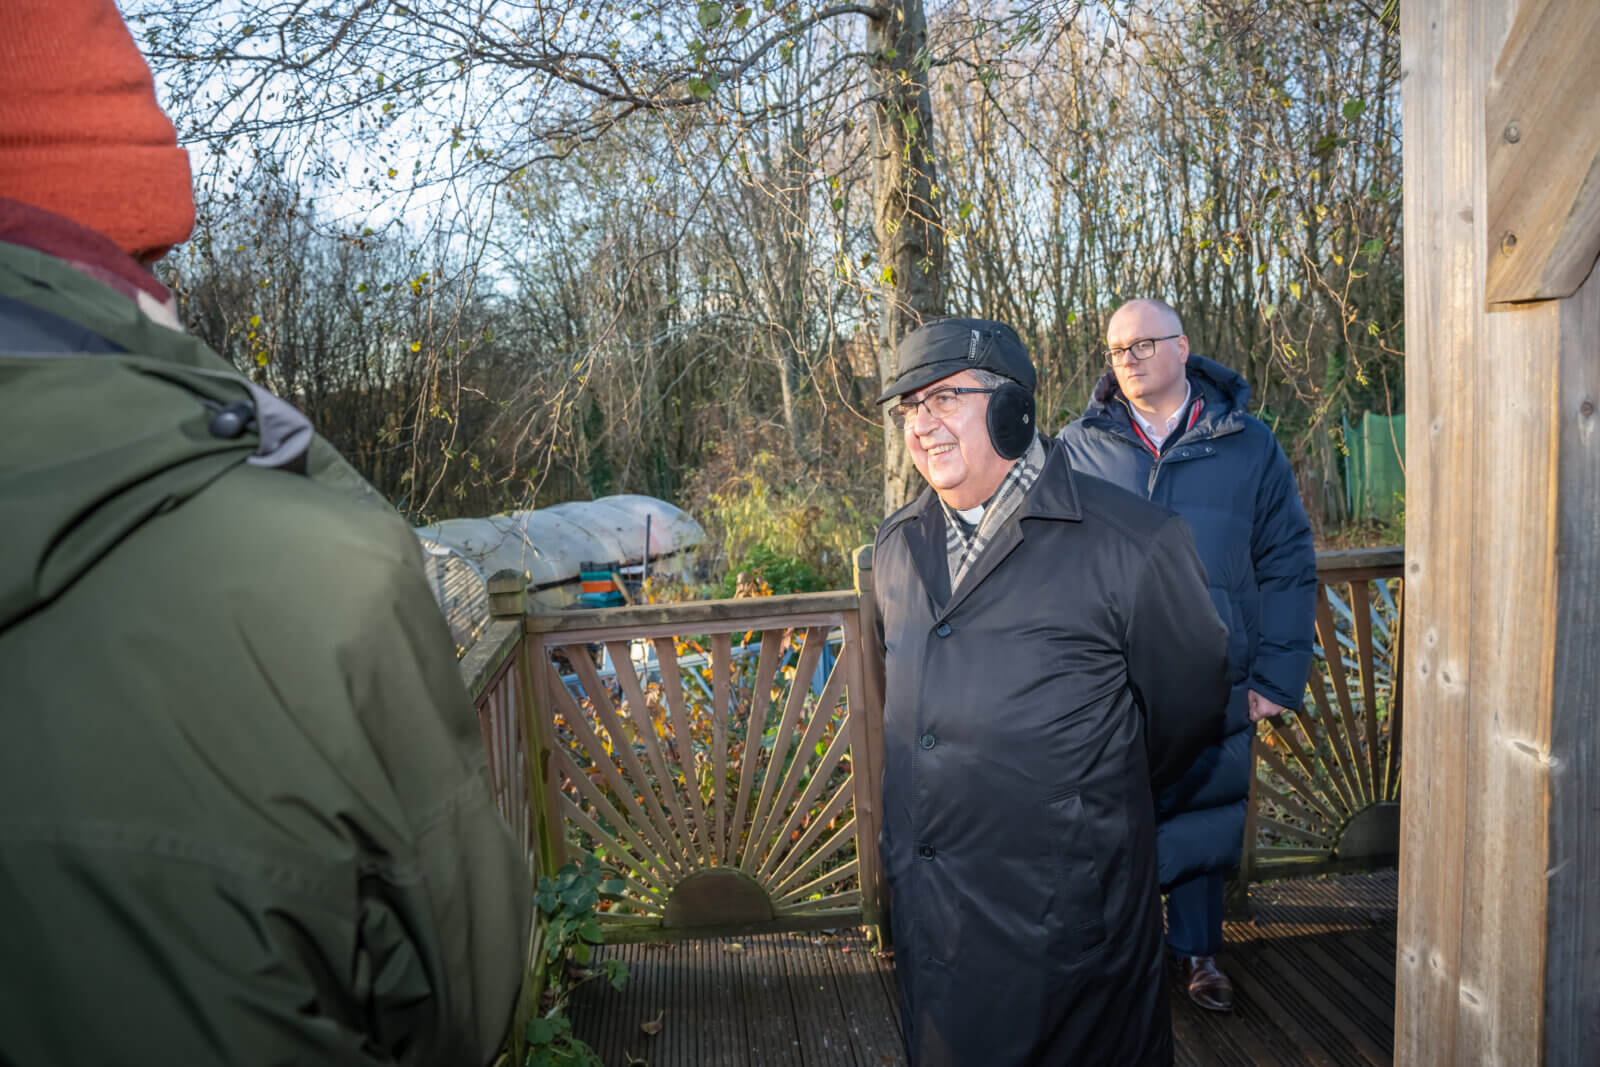 Nuncio in black goad and hat smiling at someone off camera. Caritas Salford allotment in background